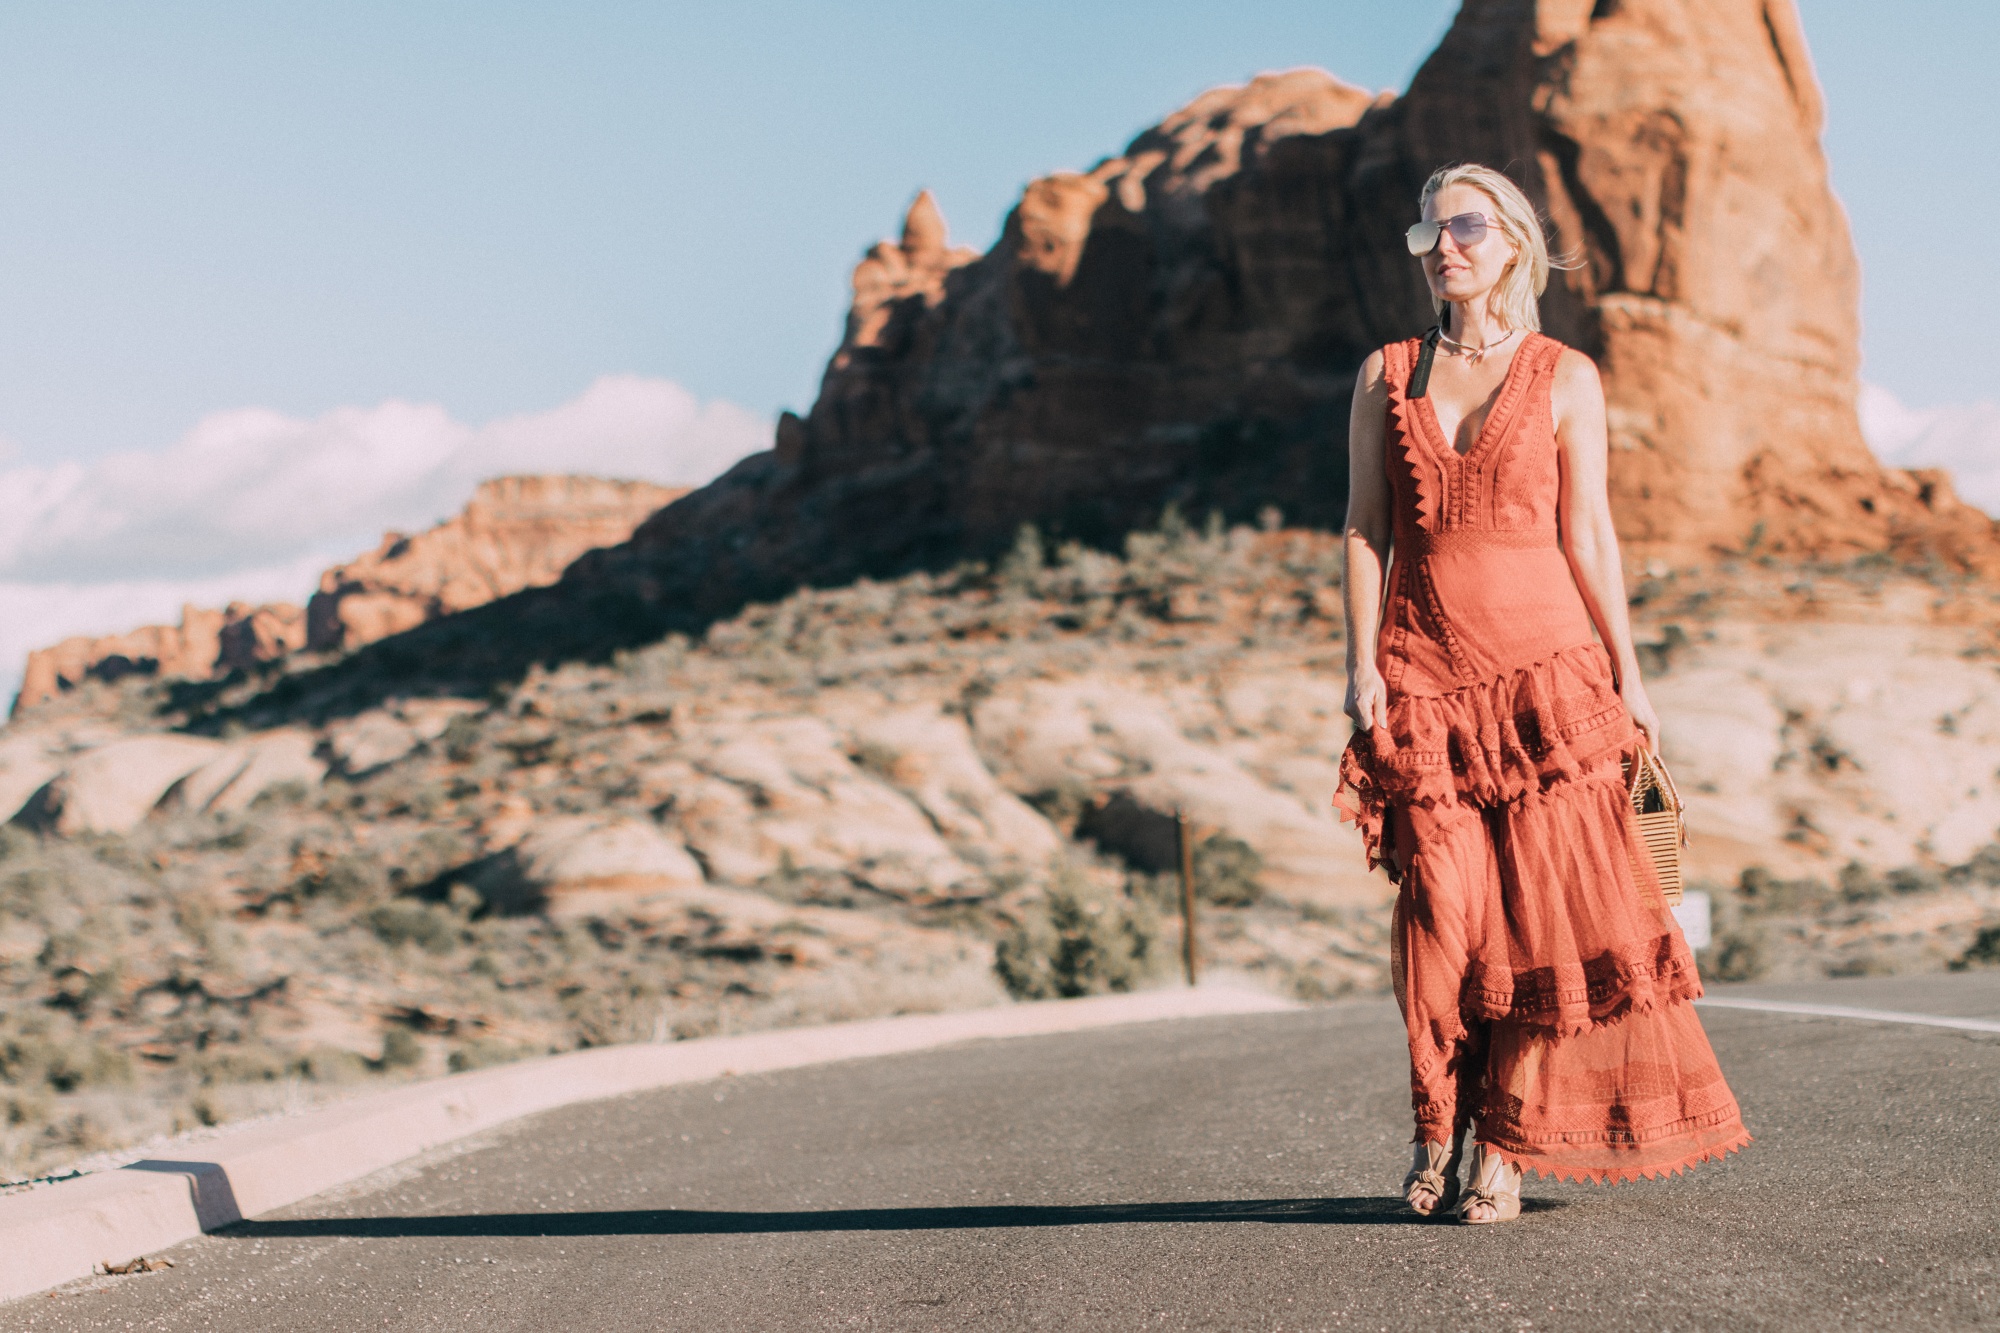 Spring Handbags, Fashion blogger Erin Busbee of BusbeeStyle.com wearing an ornage House of Harlow dress from Revolve with Vince Camuto bamboo basket bag in Moab, Utah